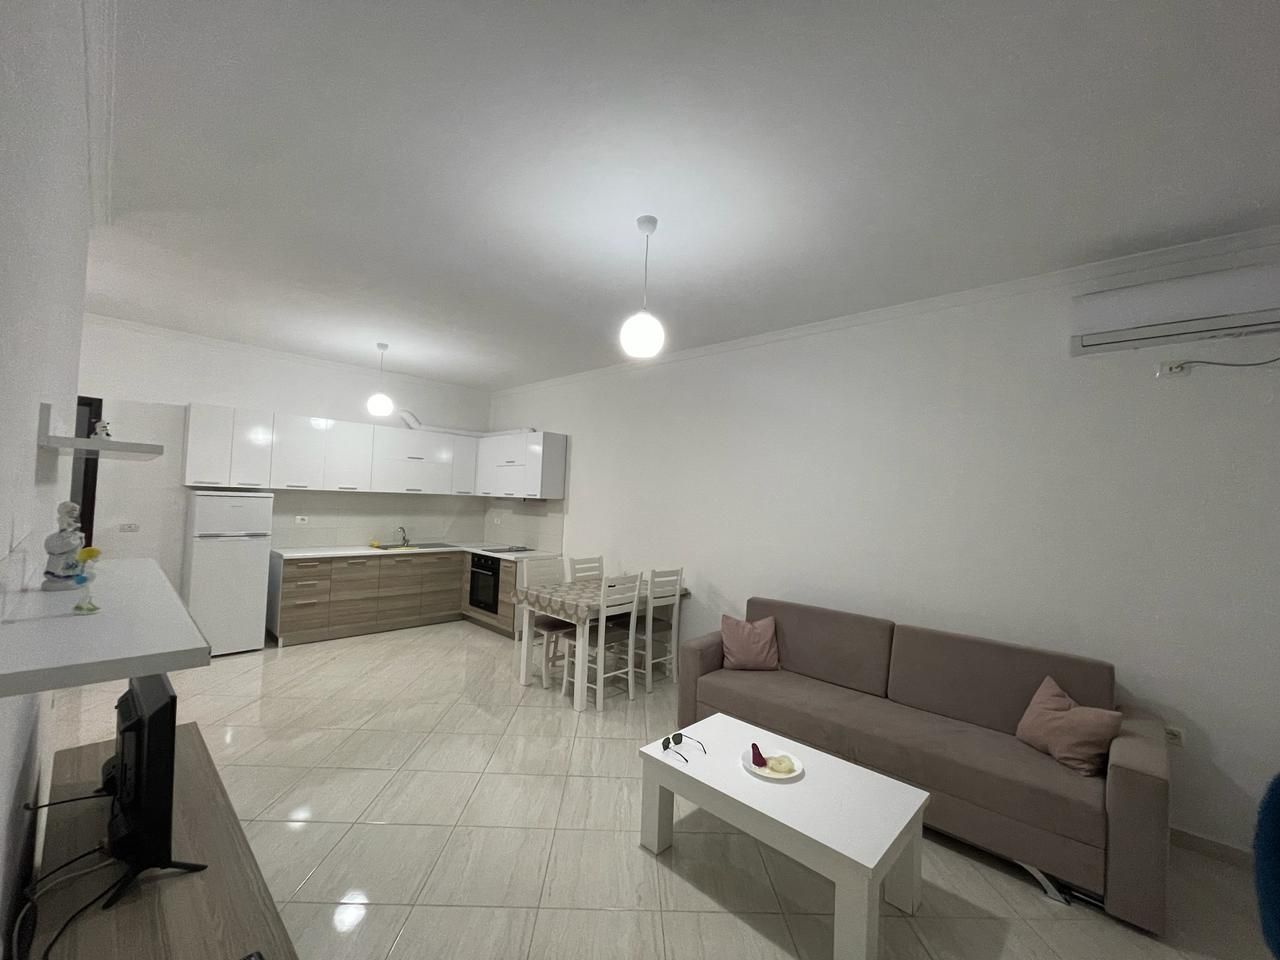 Apartment For Sale In Vlore Albania, Located In A Quiet Area, Near The Beach